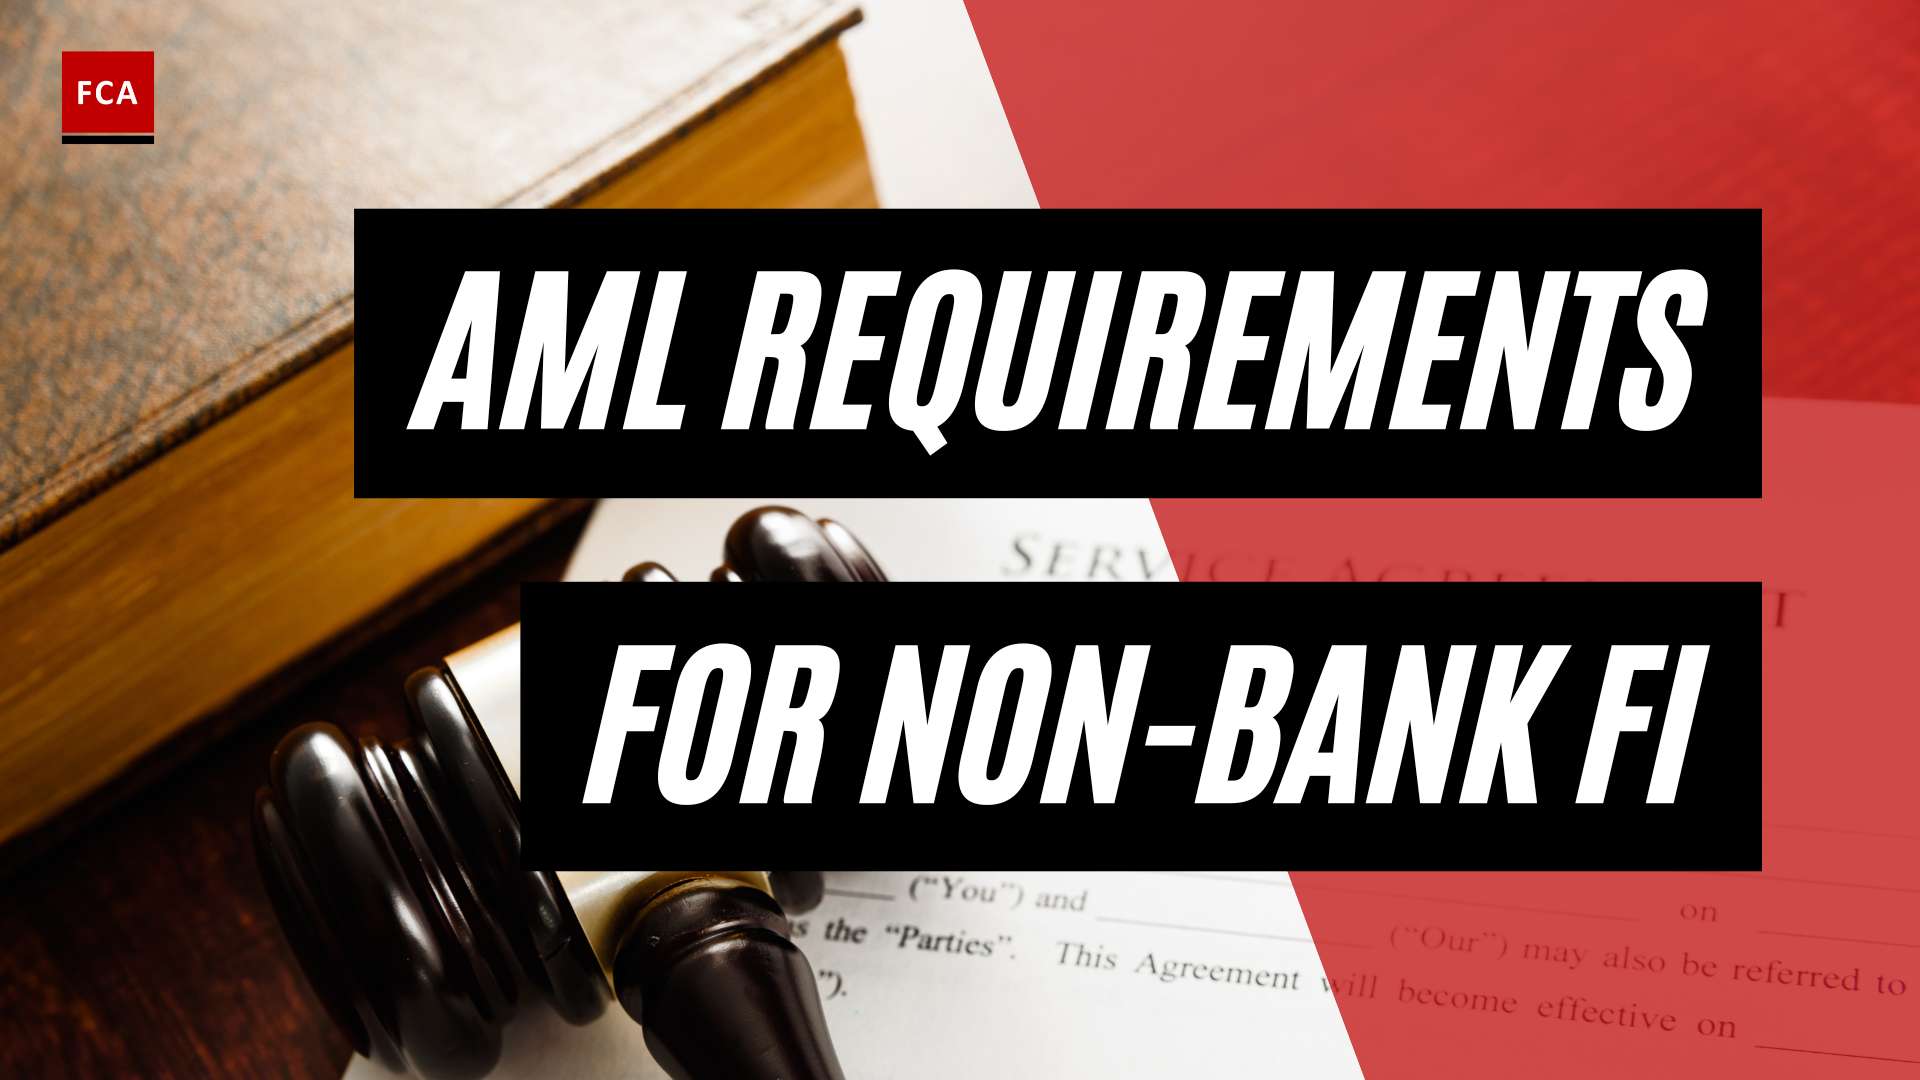 The Definitive Handbook: Aml Requirements For Non-Bank Financial Institutions